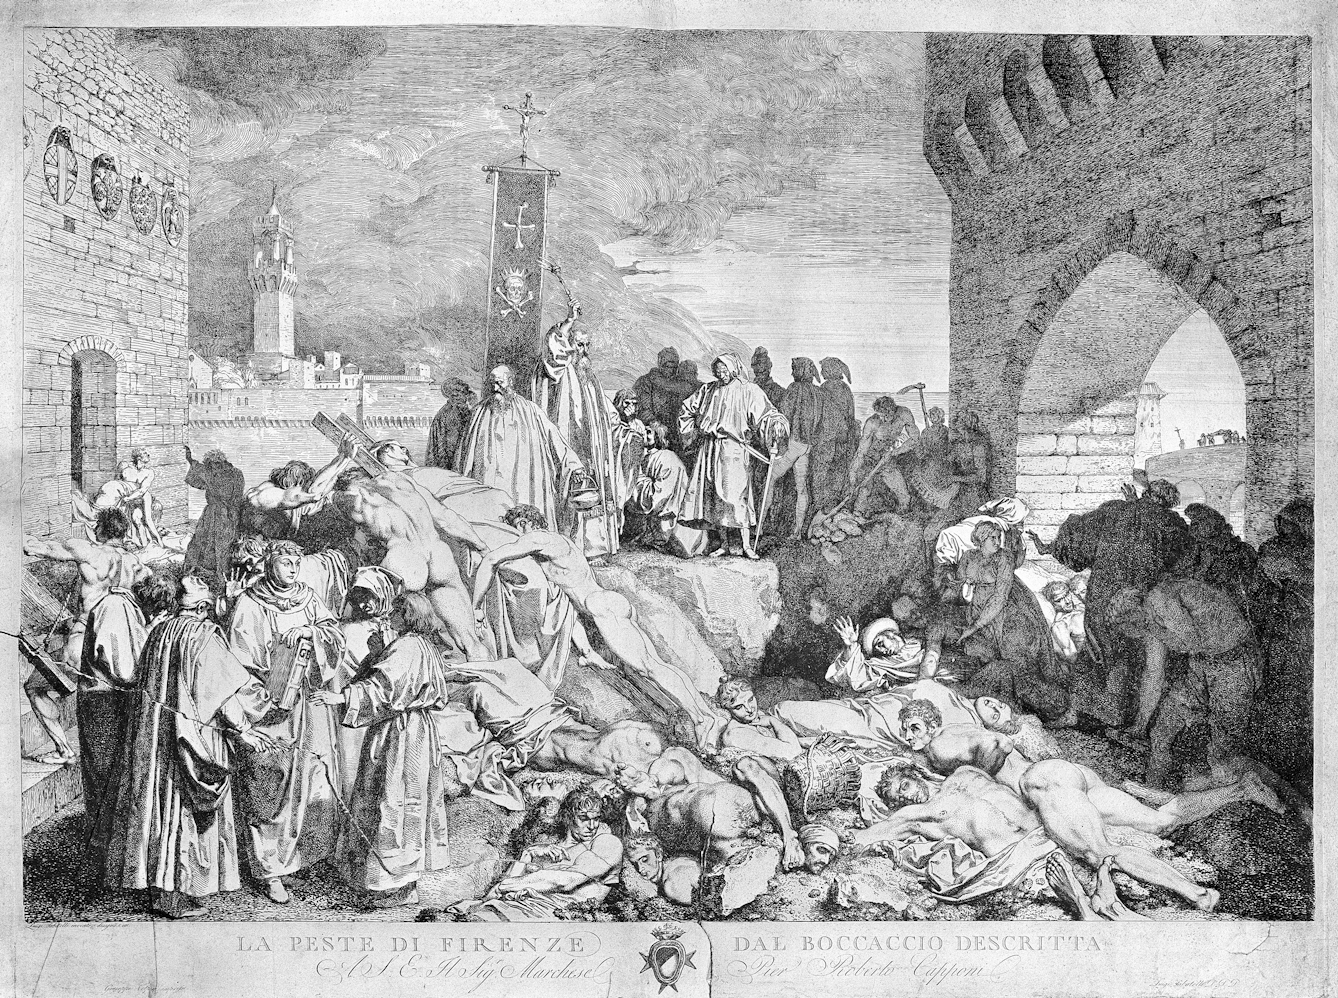 An etching depicting the plague of Florence in 1348, with bodies piled high. 